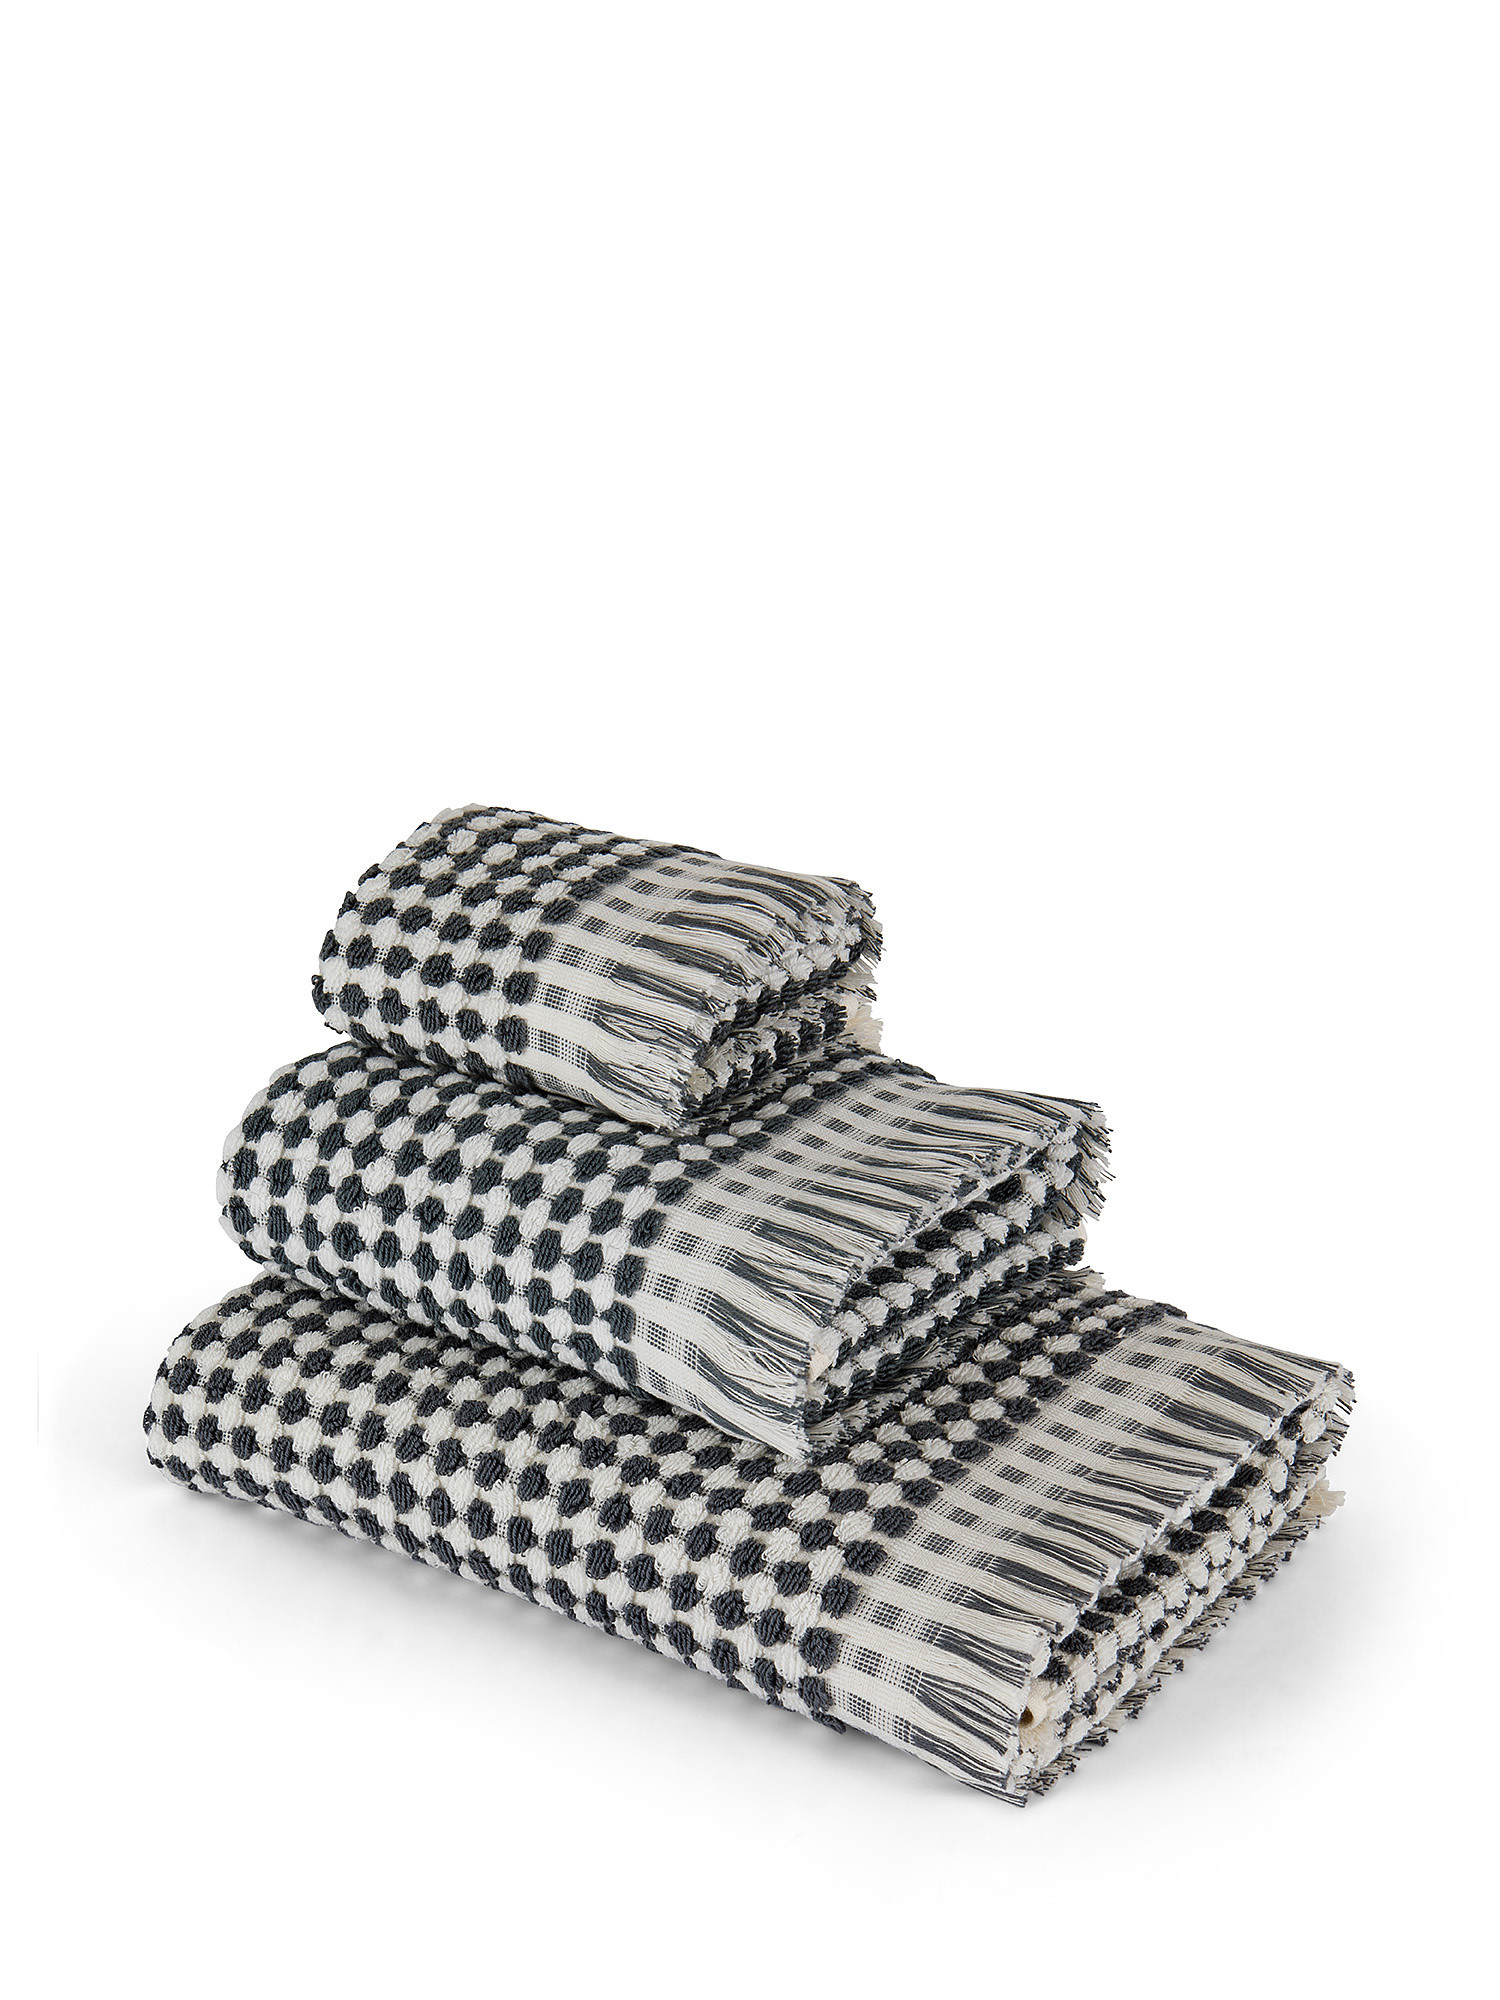 Thermae check weave towel in 100% cotton terry, , large image number 0